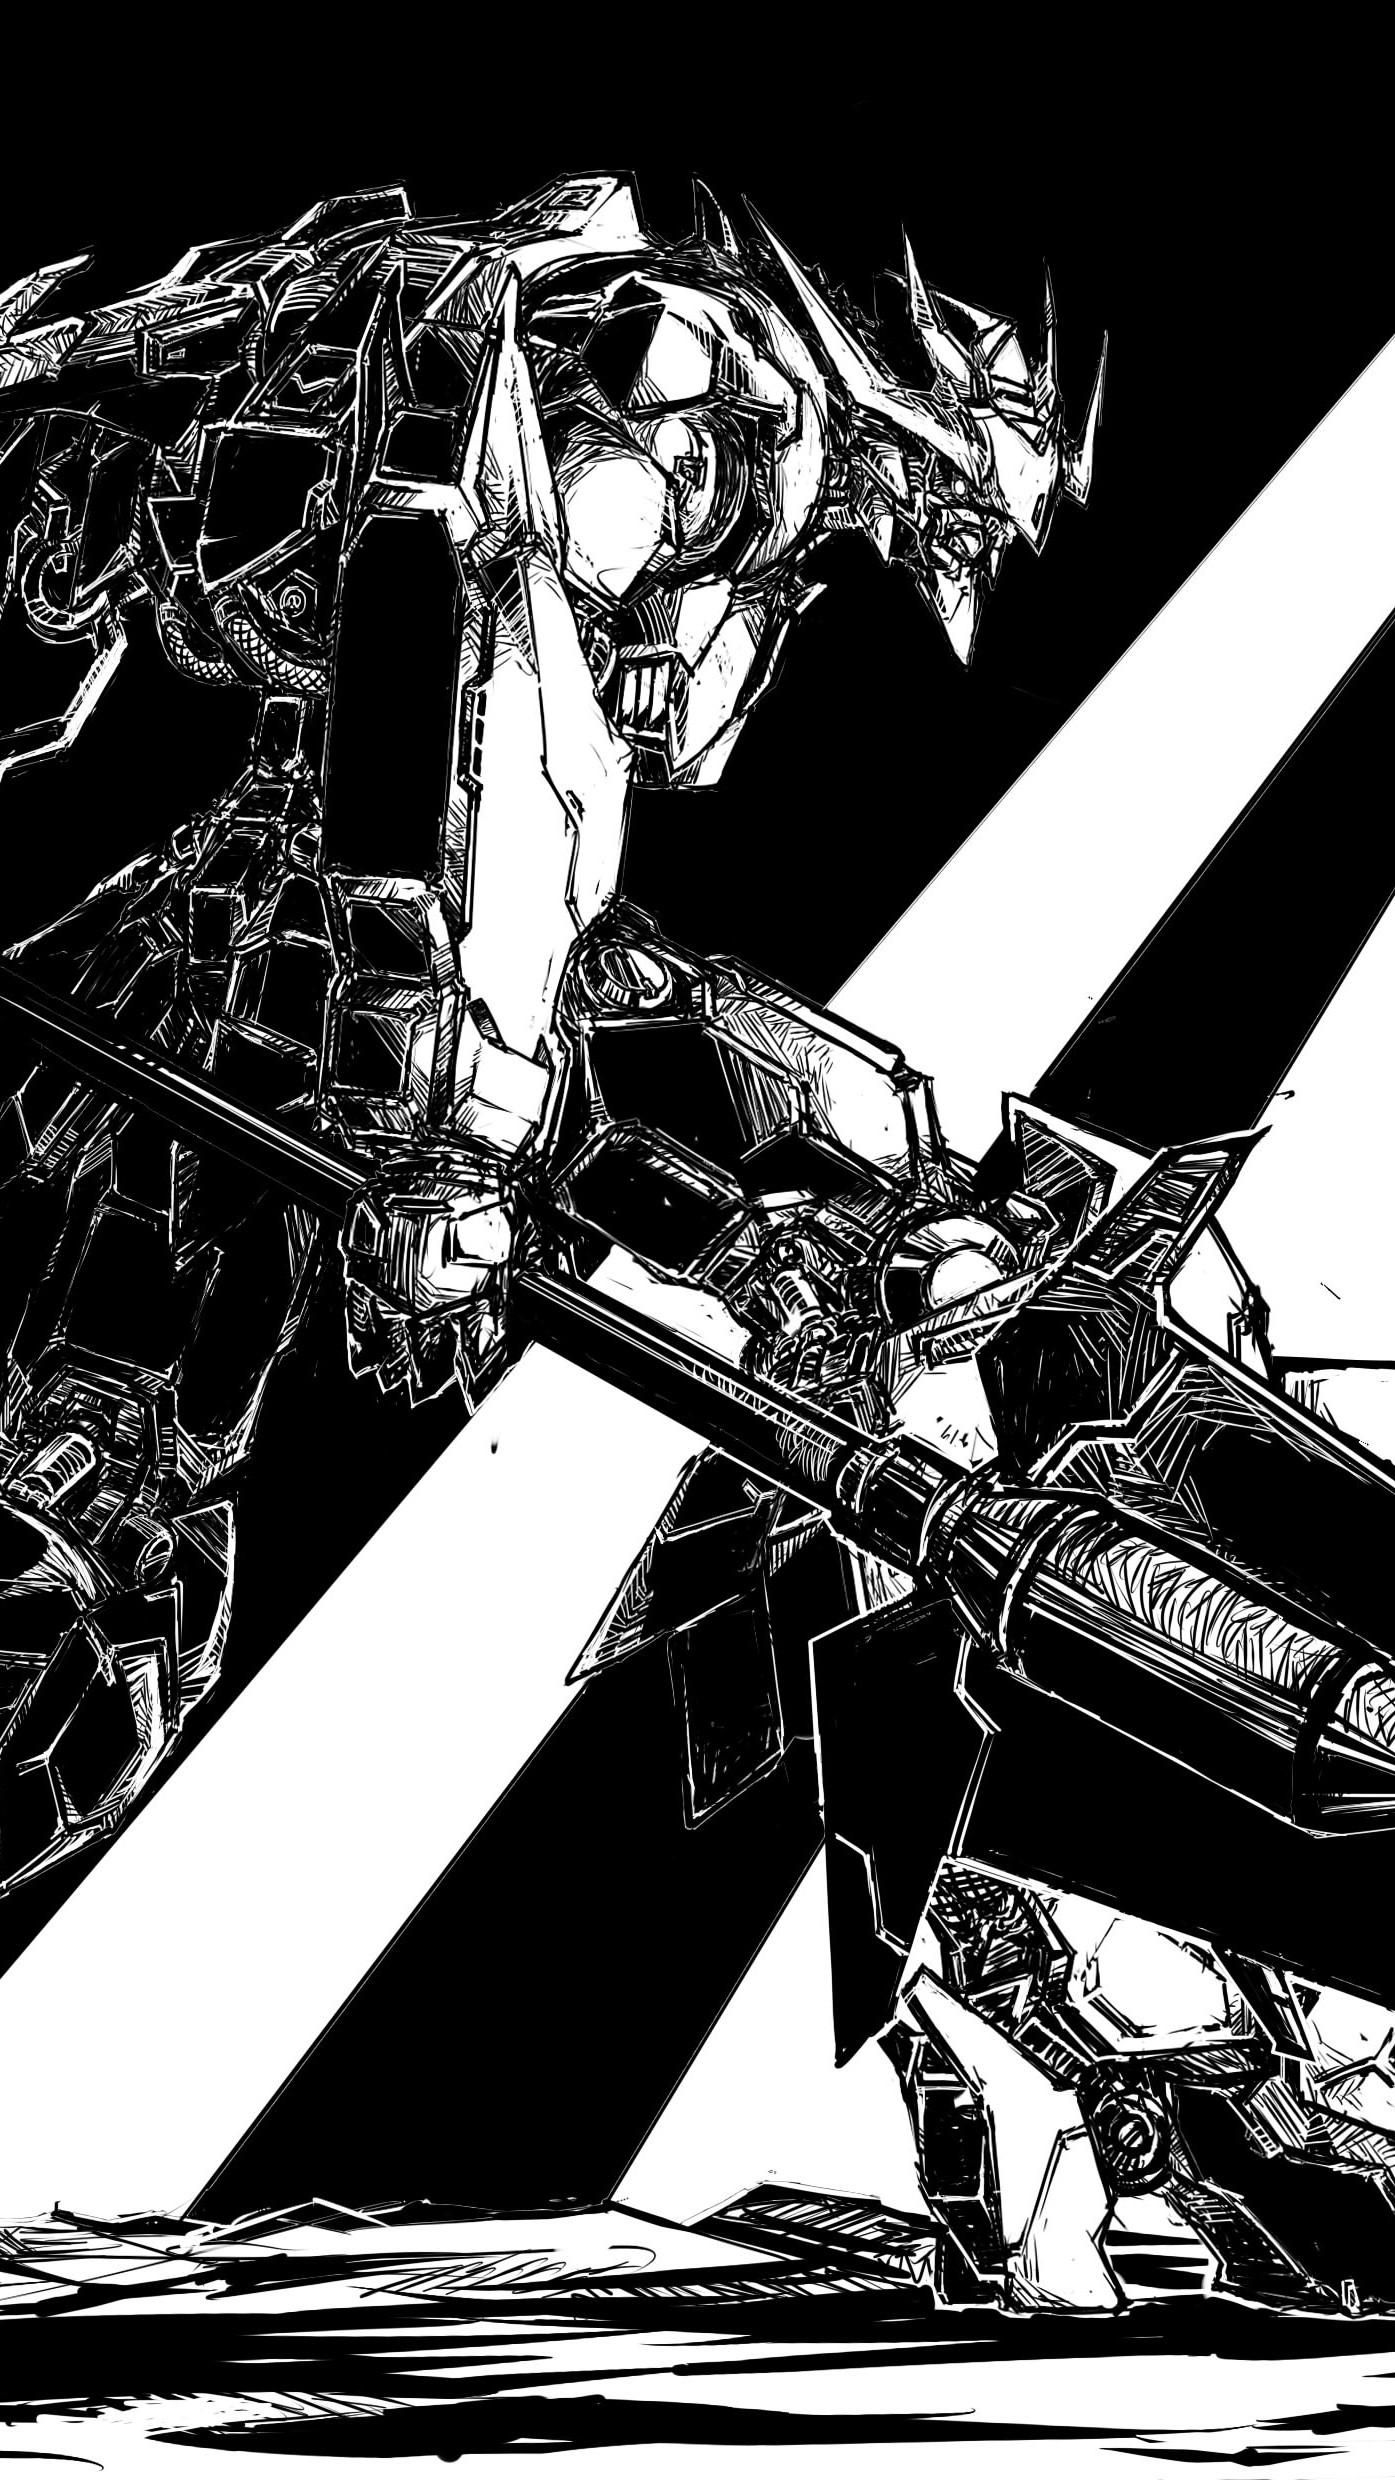 A black and white drawing of an armored robot - Dark anime